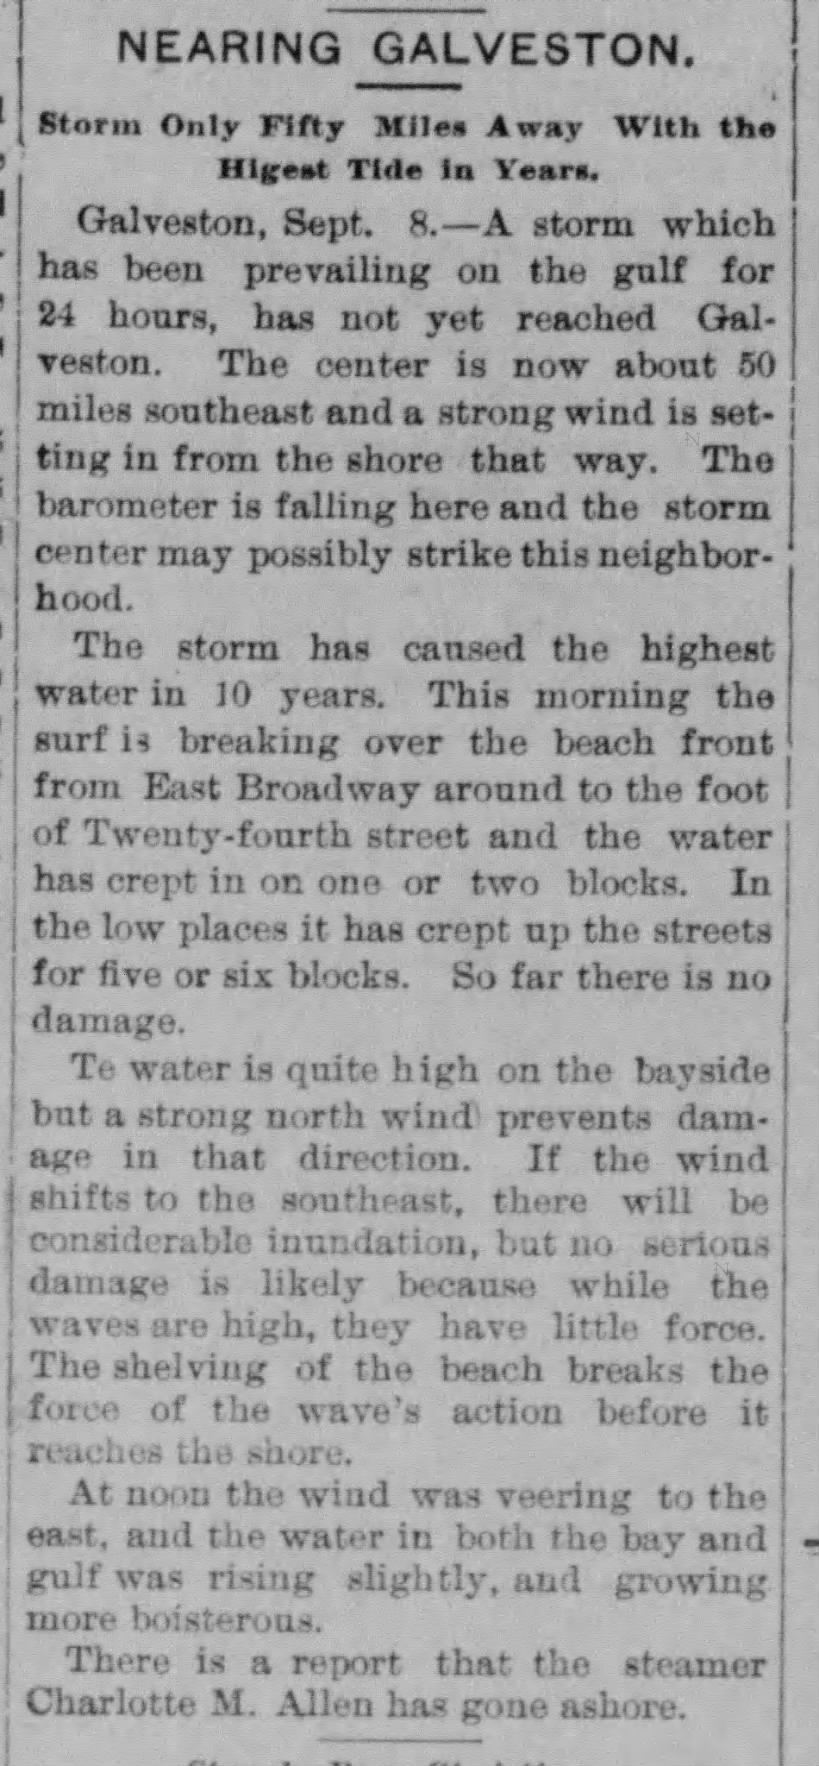 Newspaper reports that a hurricane is nearing Galveston, Texas, in September 1900